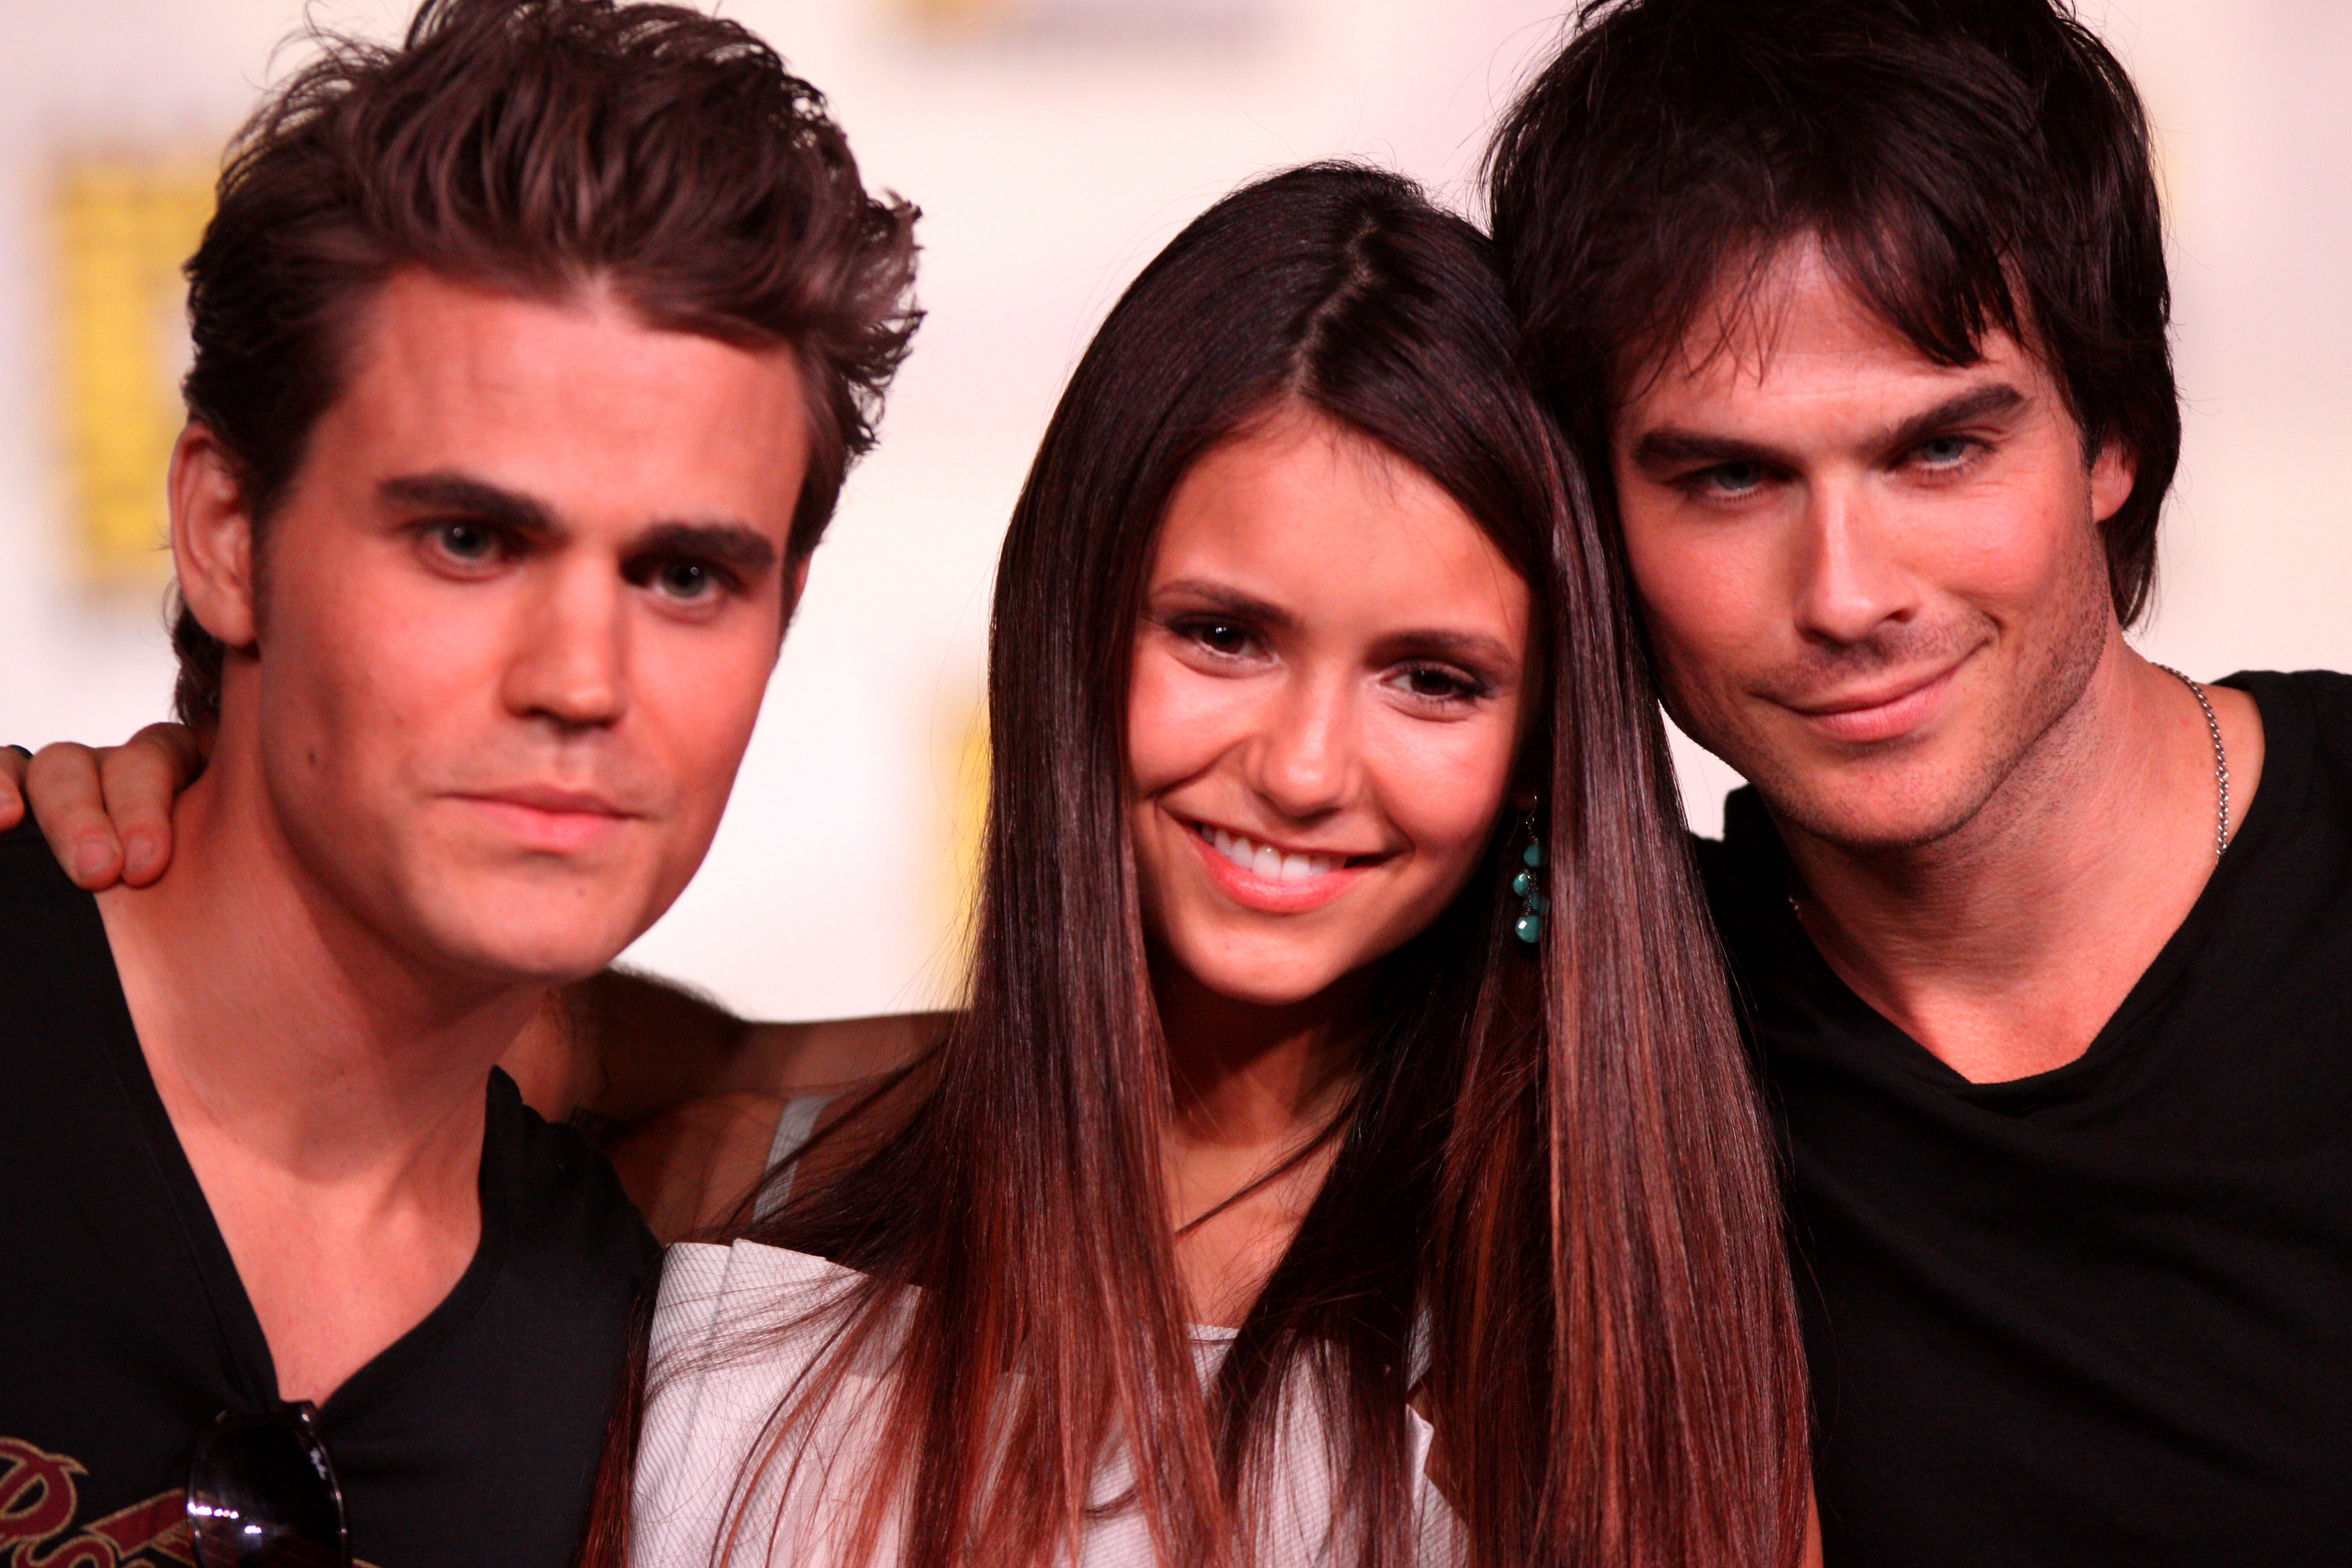 Vampire Diaries Gets Mixed Reviews from Students